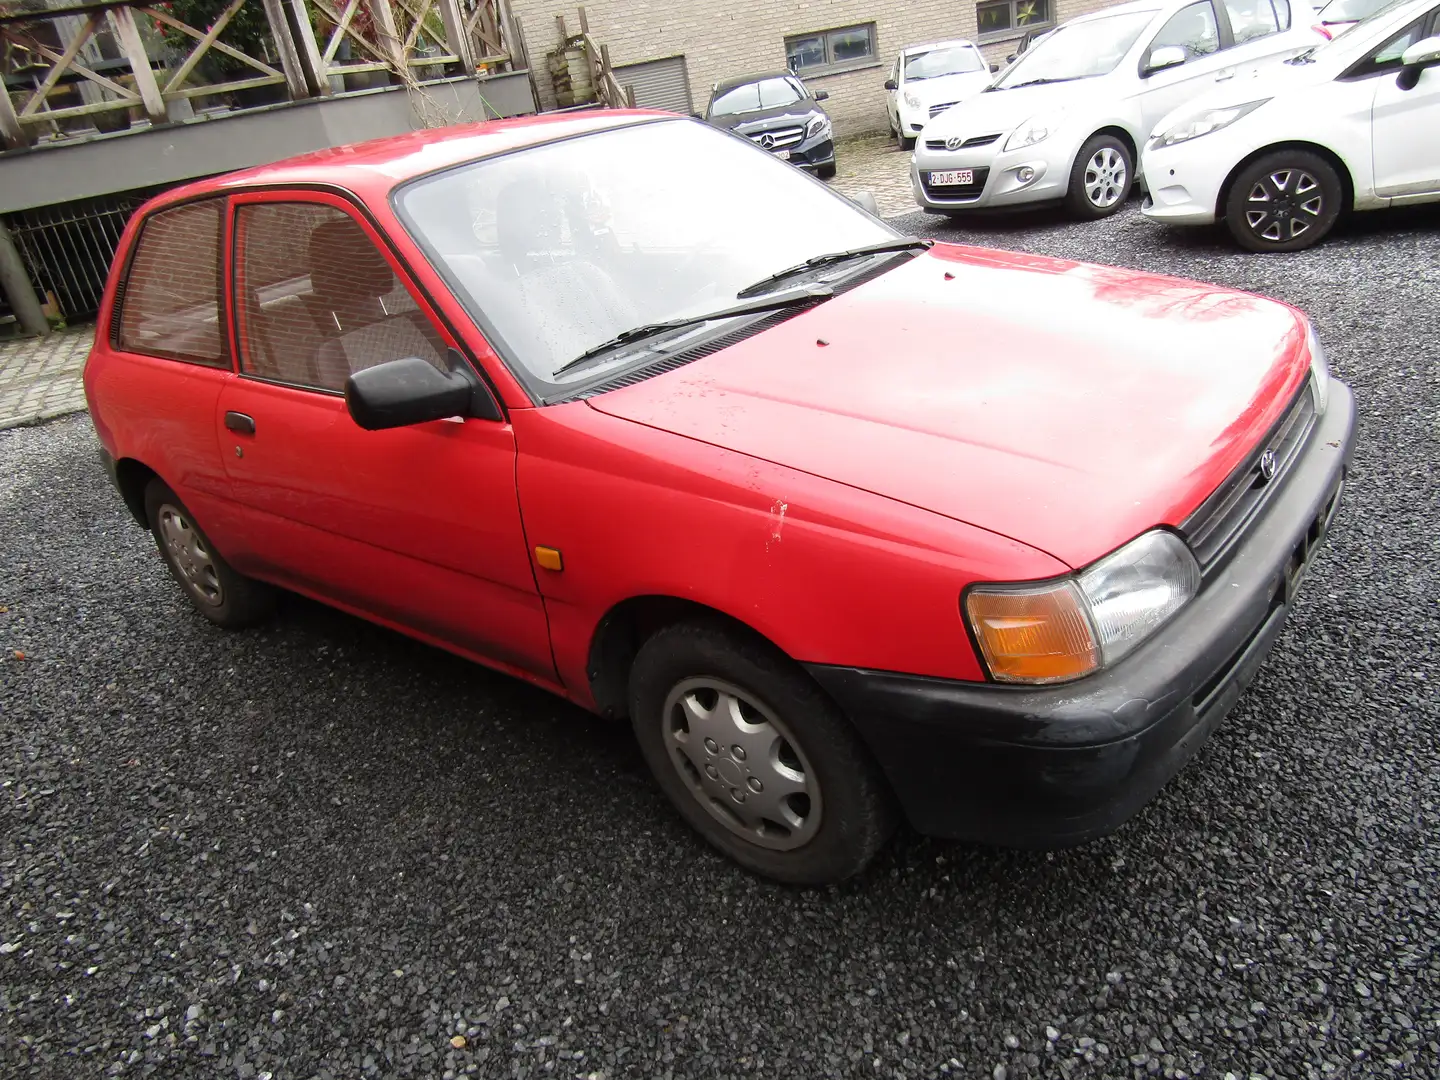 Toyota Starlet 1.0i (immatriculation ancêtre possible) 32 ans Roşu - 1